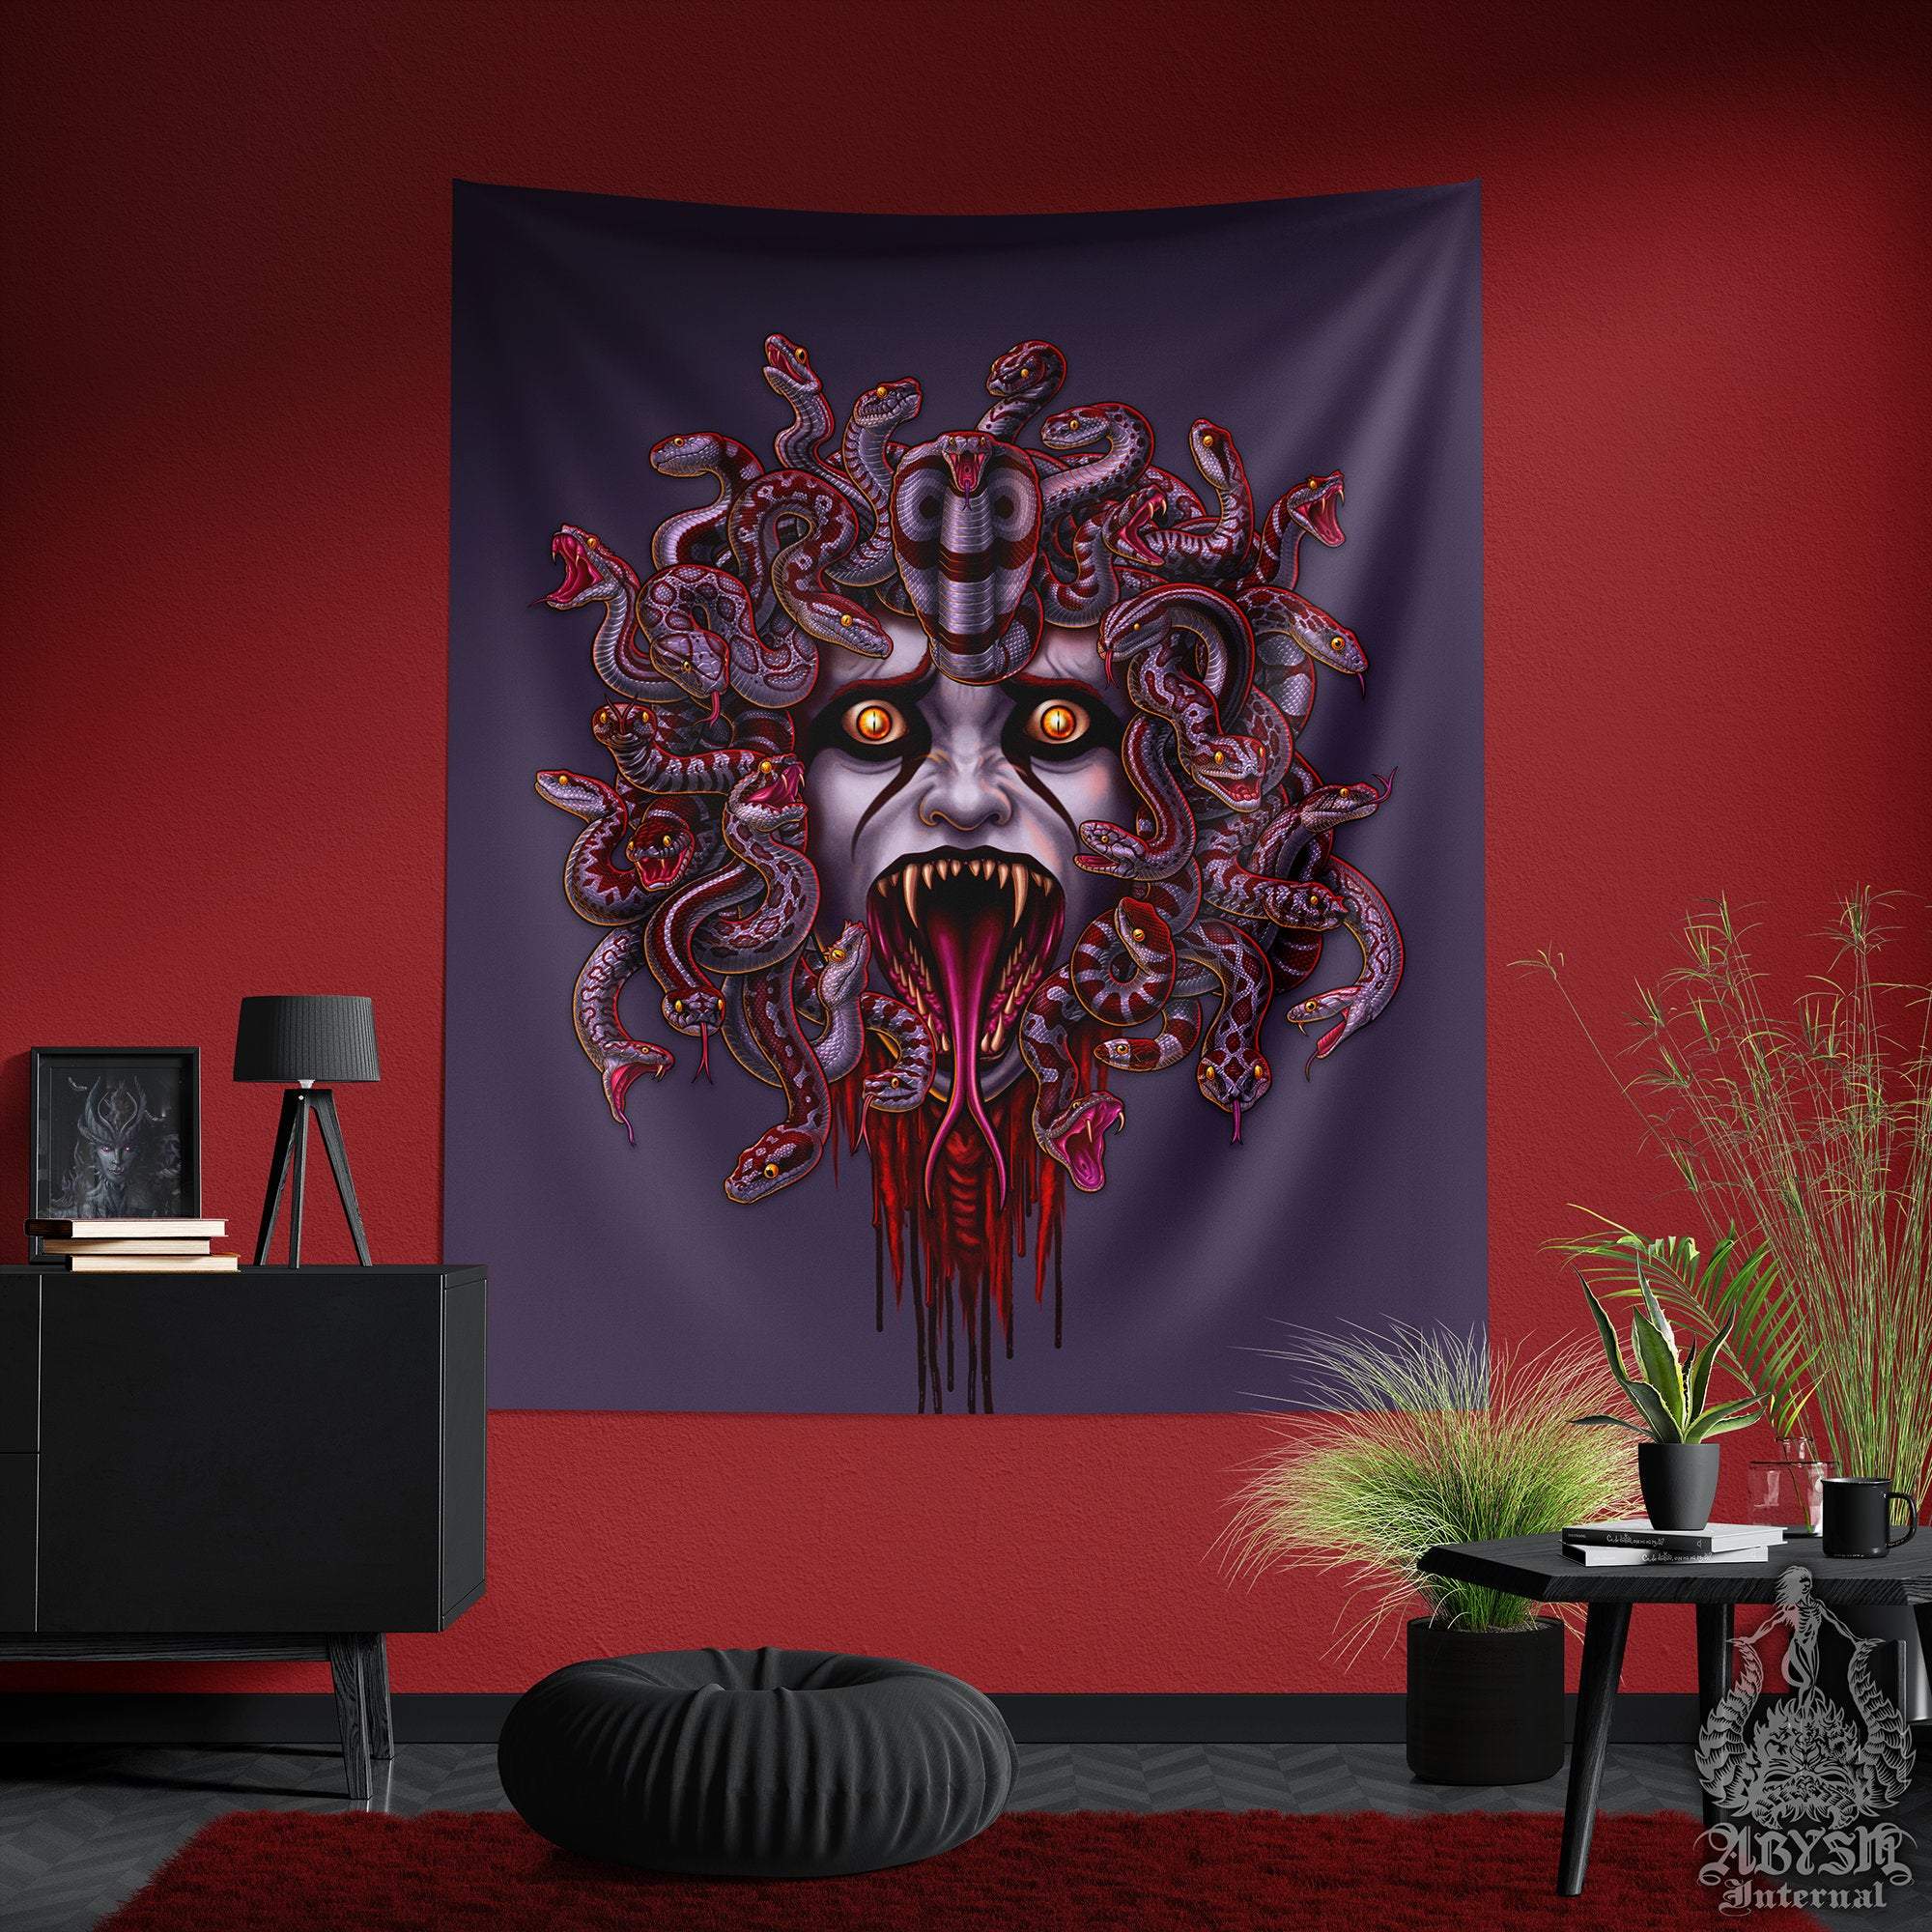 Medusa Tapestry, Goth Wall Hanging, Fantasy Home Decor, Art Print - Bloody Ash, Grey Snakes, 3 Faces - Abysm Internal